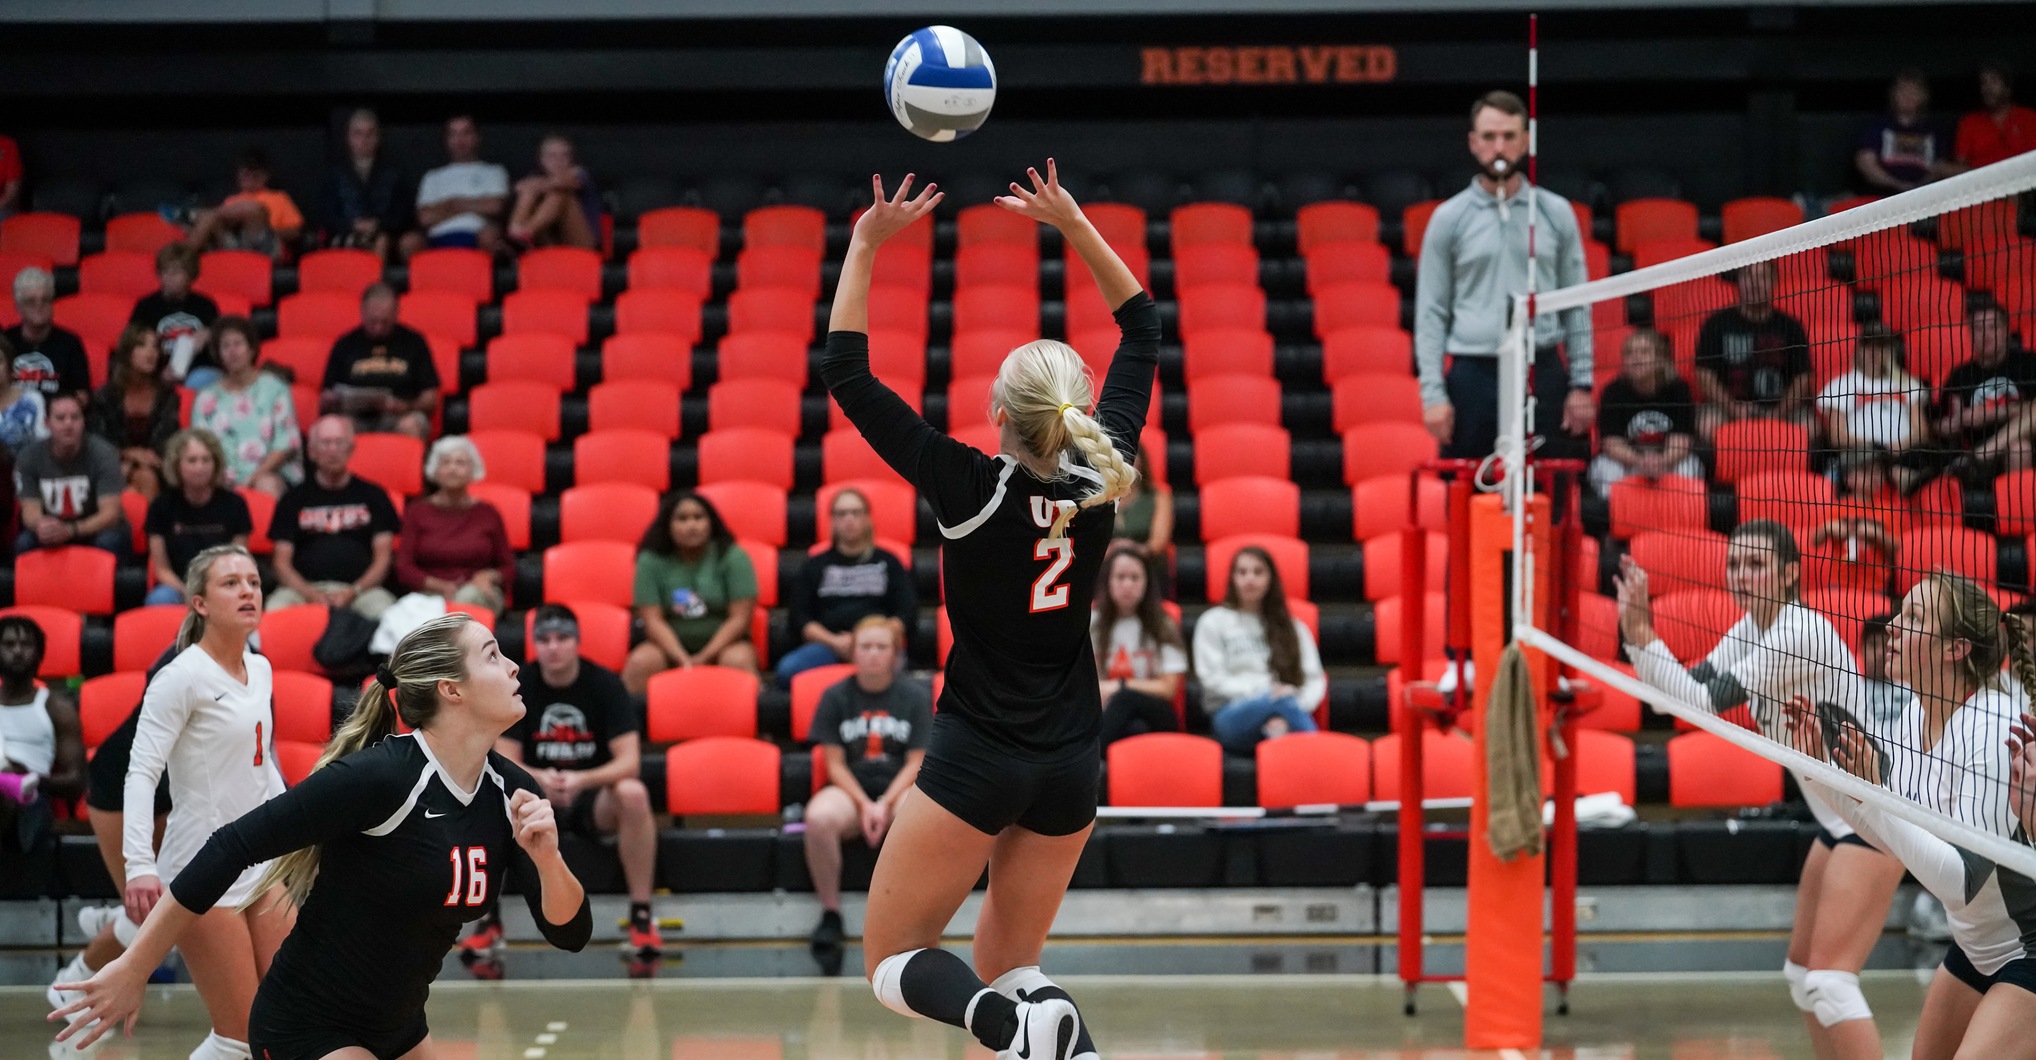 Oilers Fall to Cedarville in Three Sets